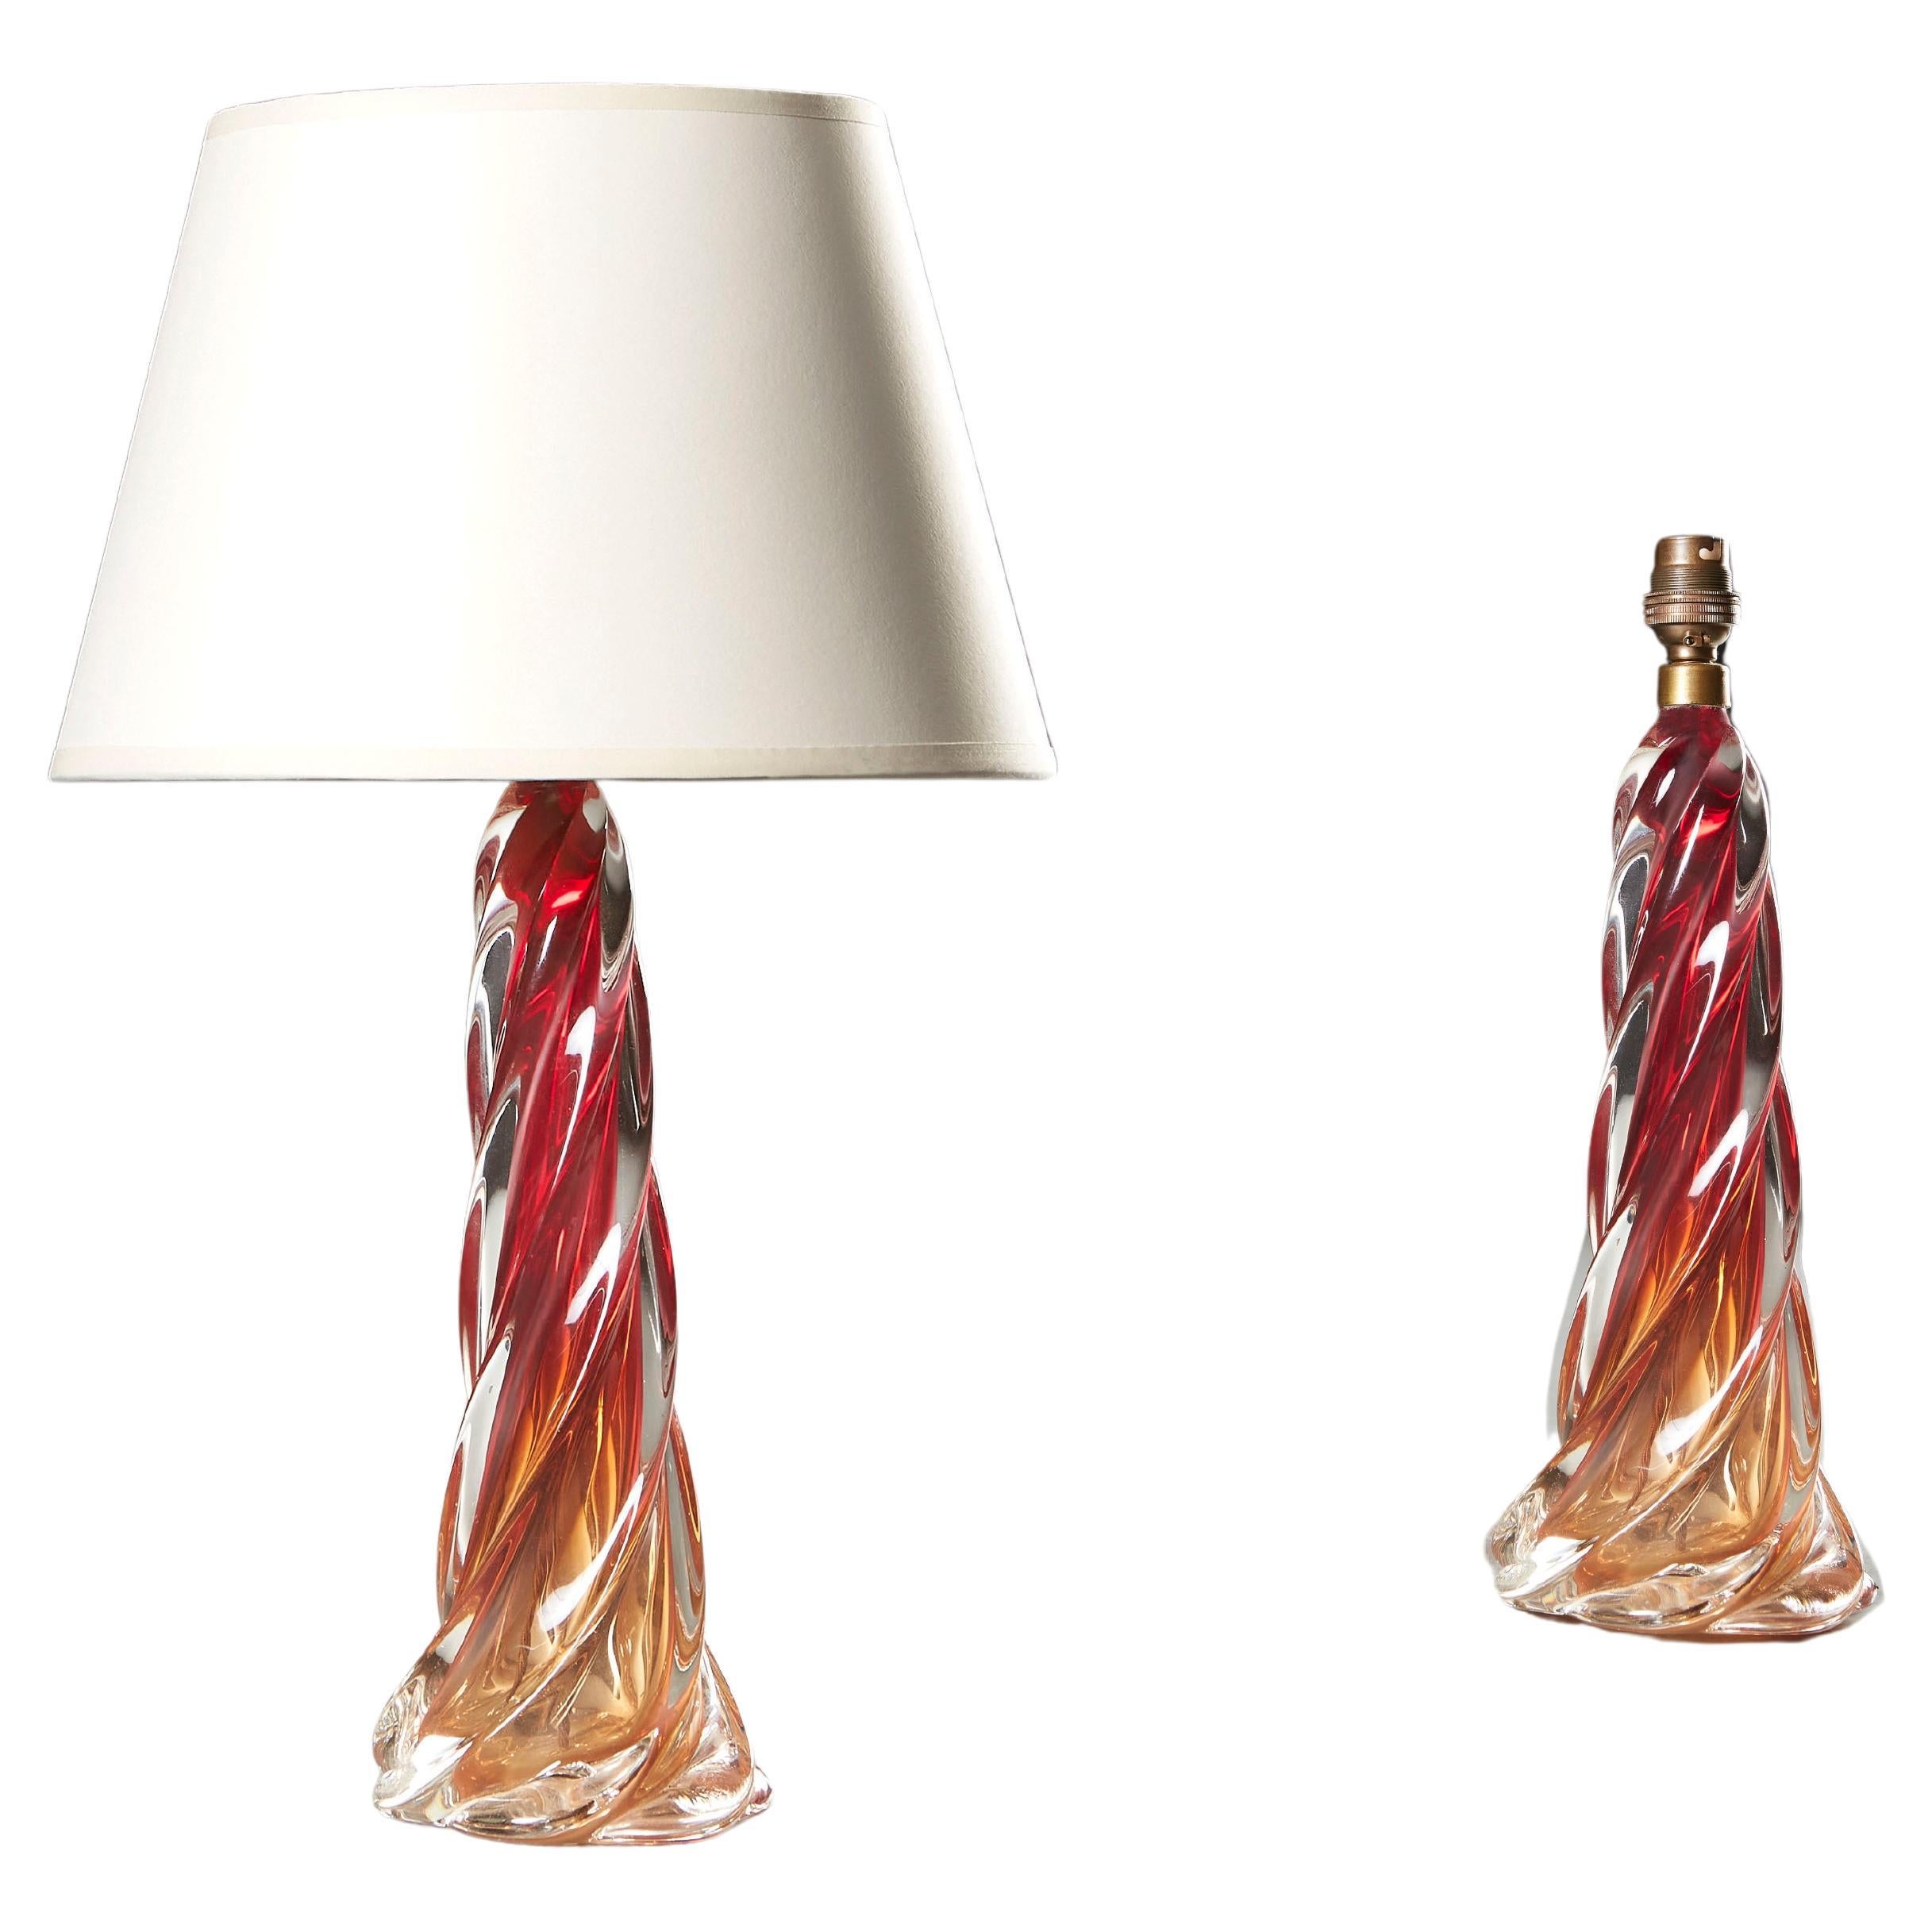 A Matched Pair of Red Murano Glass Spiral Table Lamps